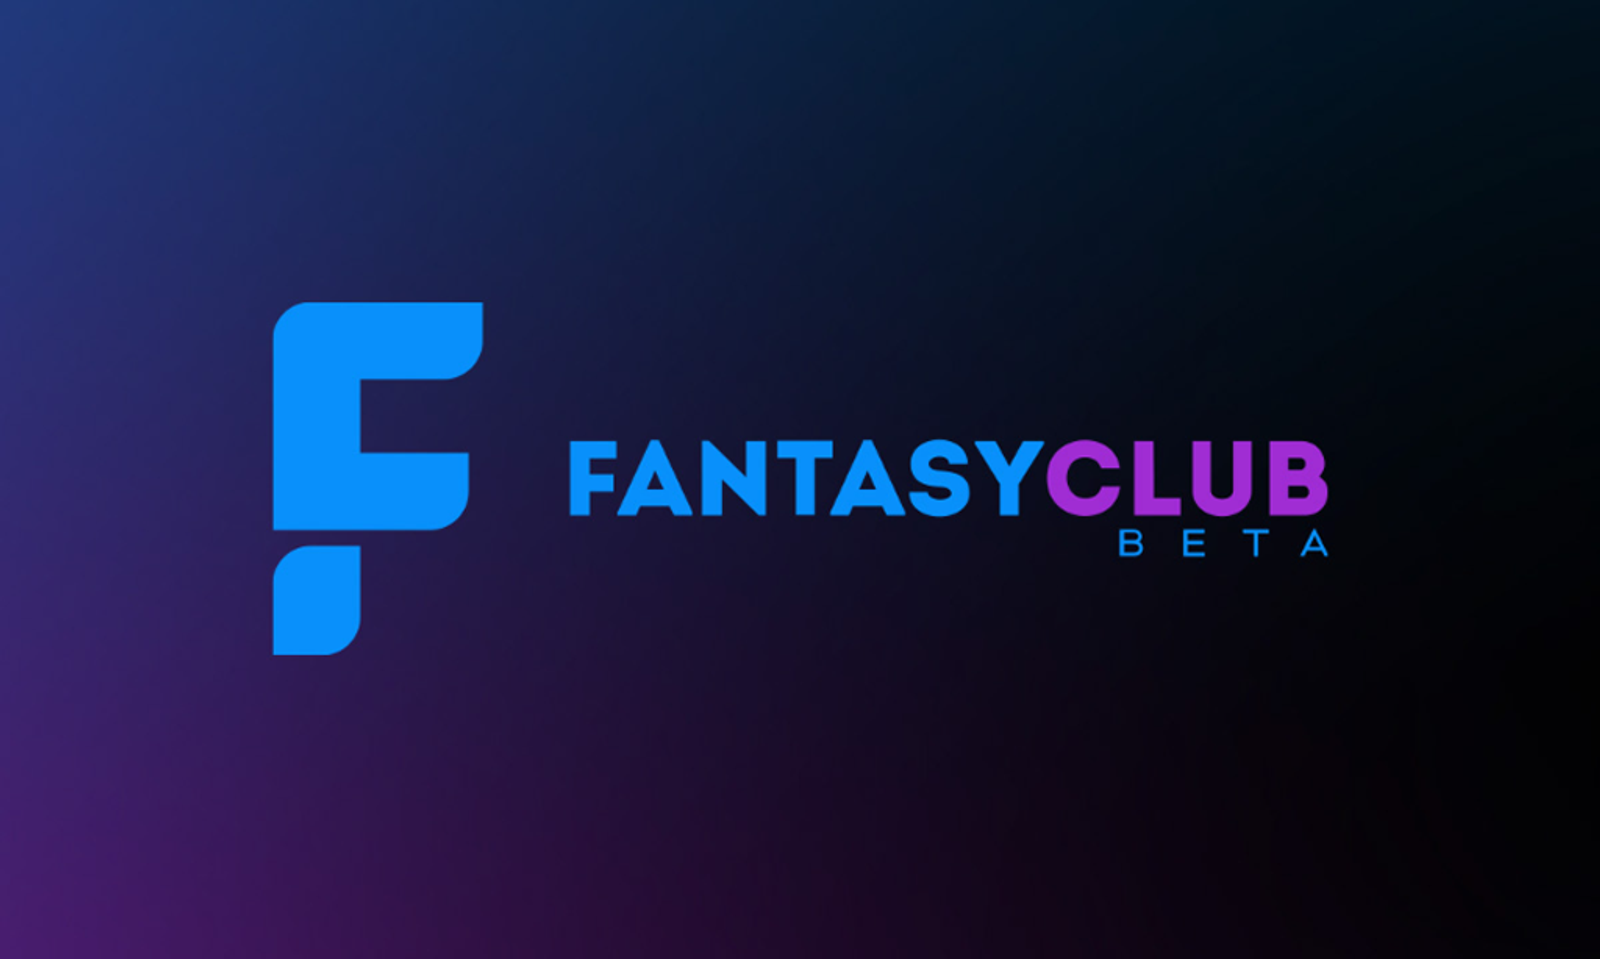 Adult Empire Accepting Sign-Ups for Creator Site Fantasy Club